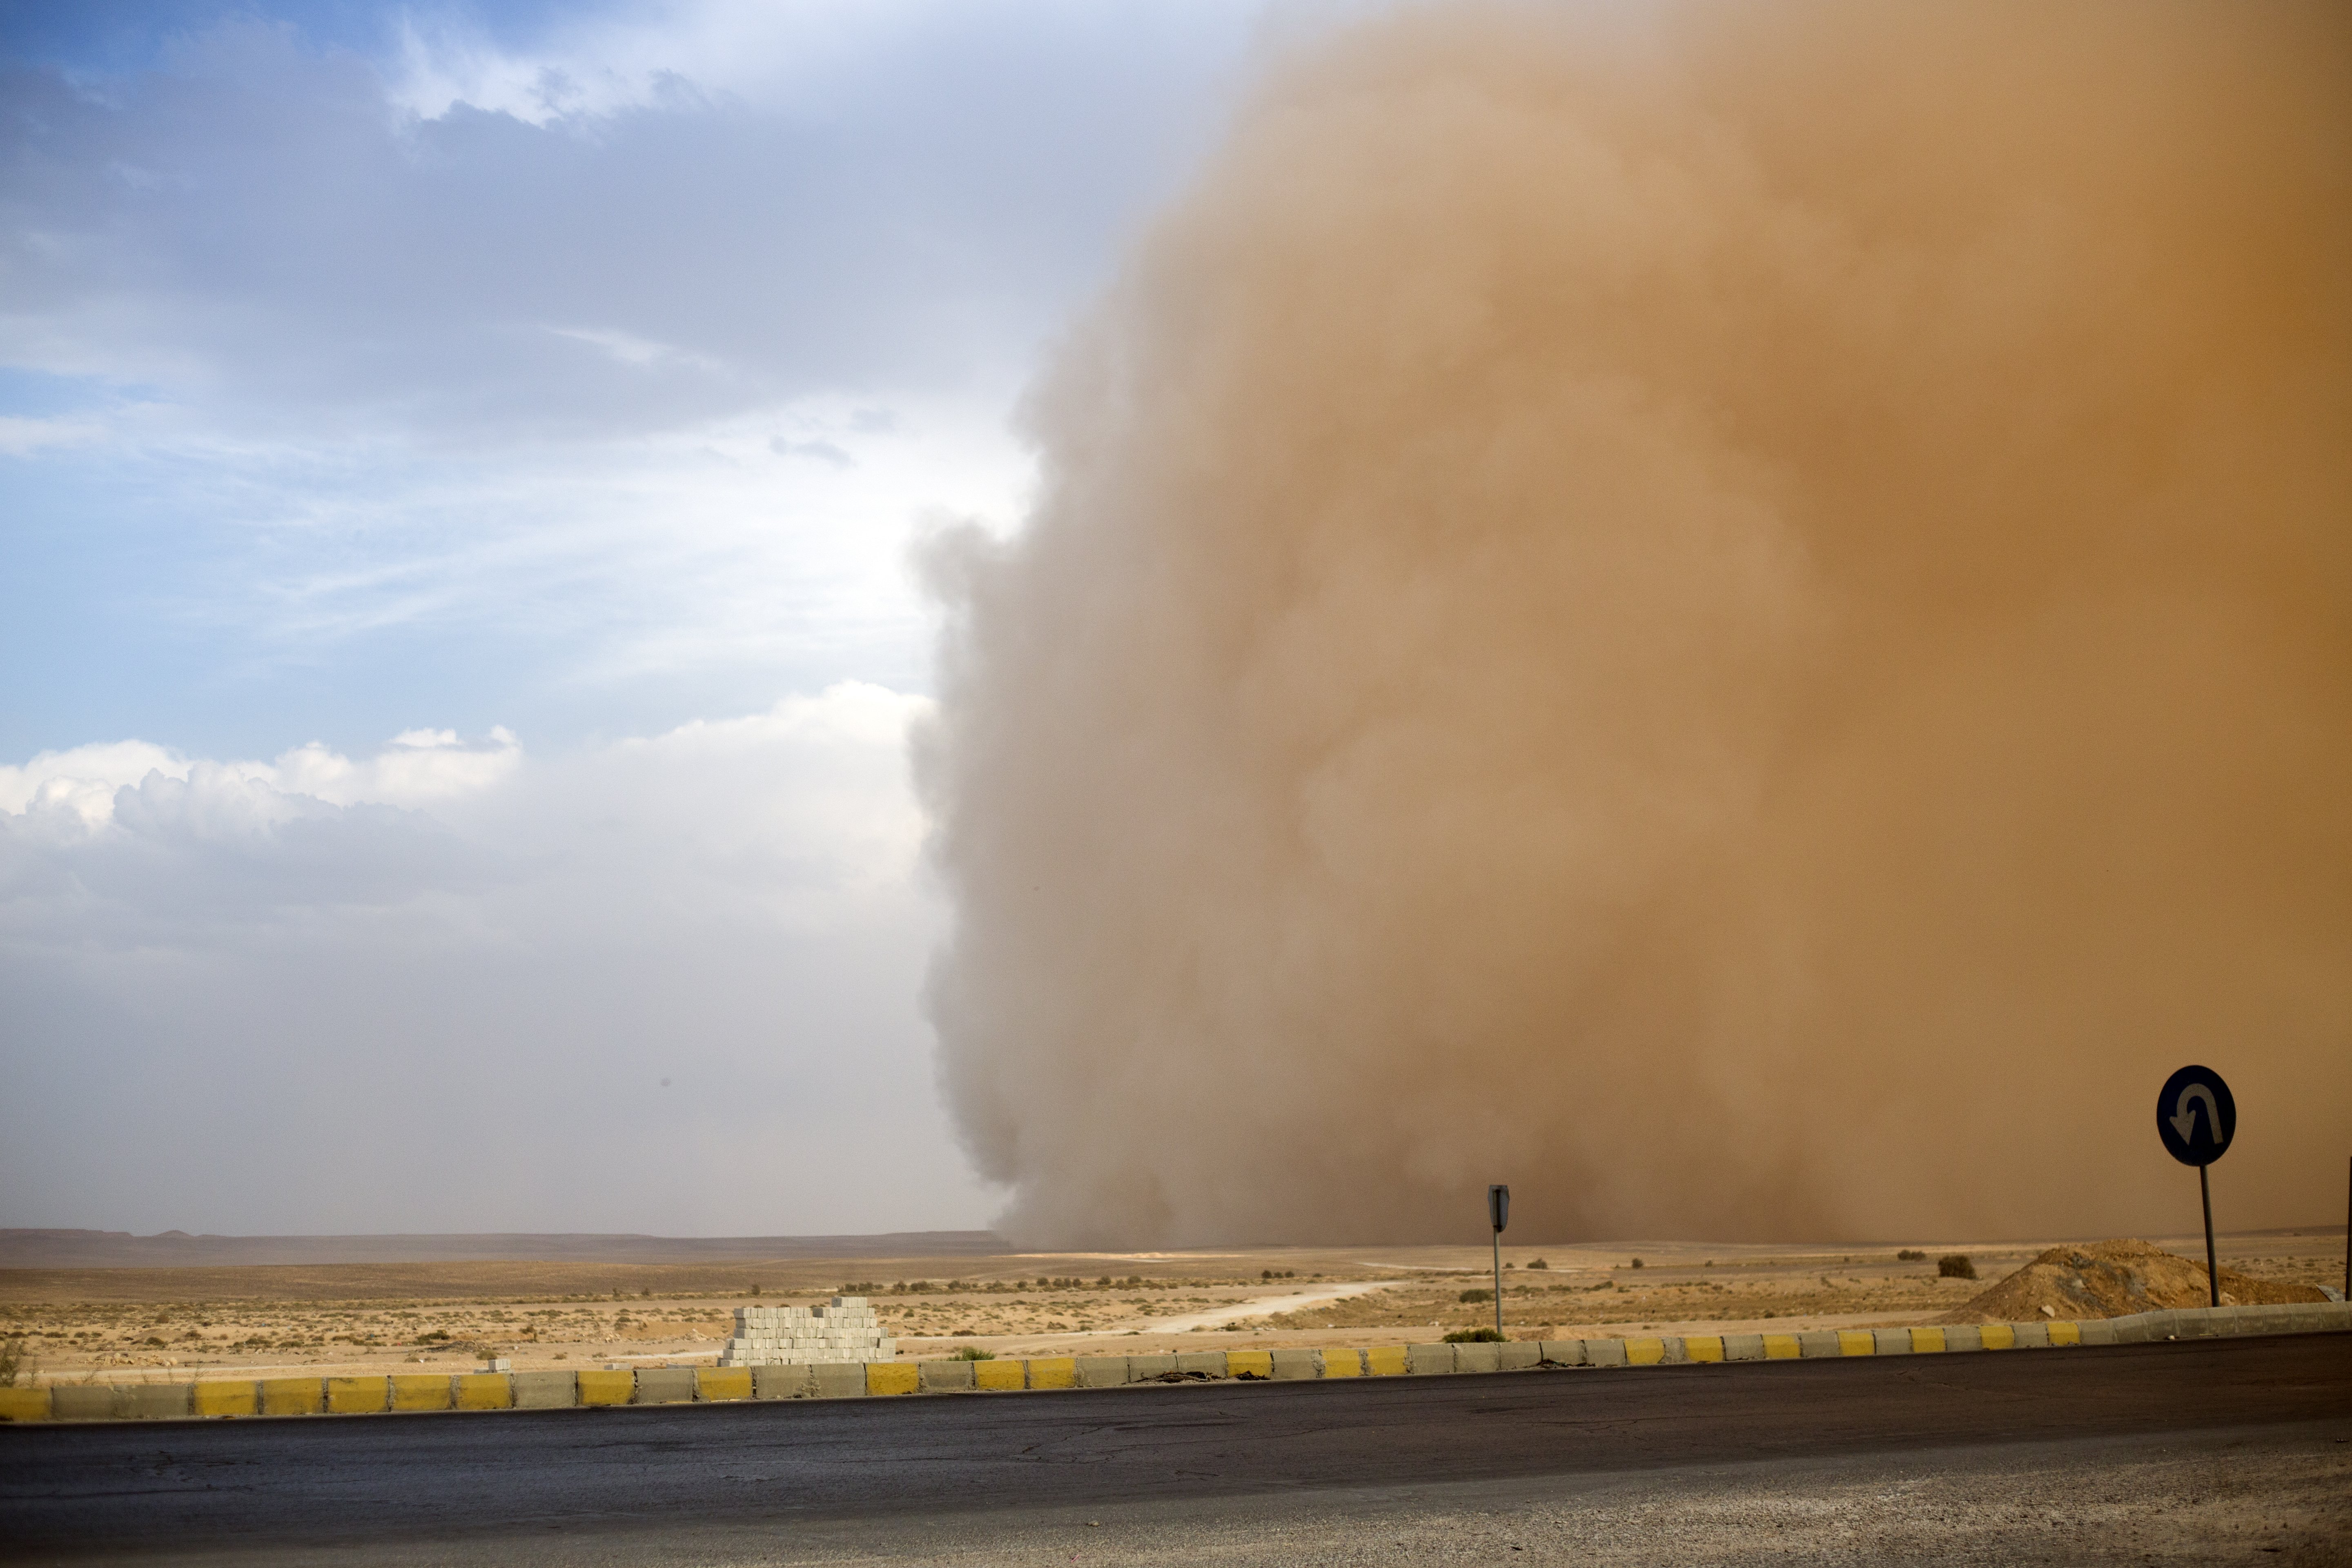 Sandstorm from a distance